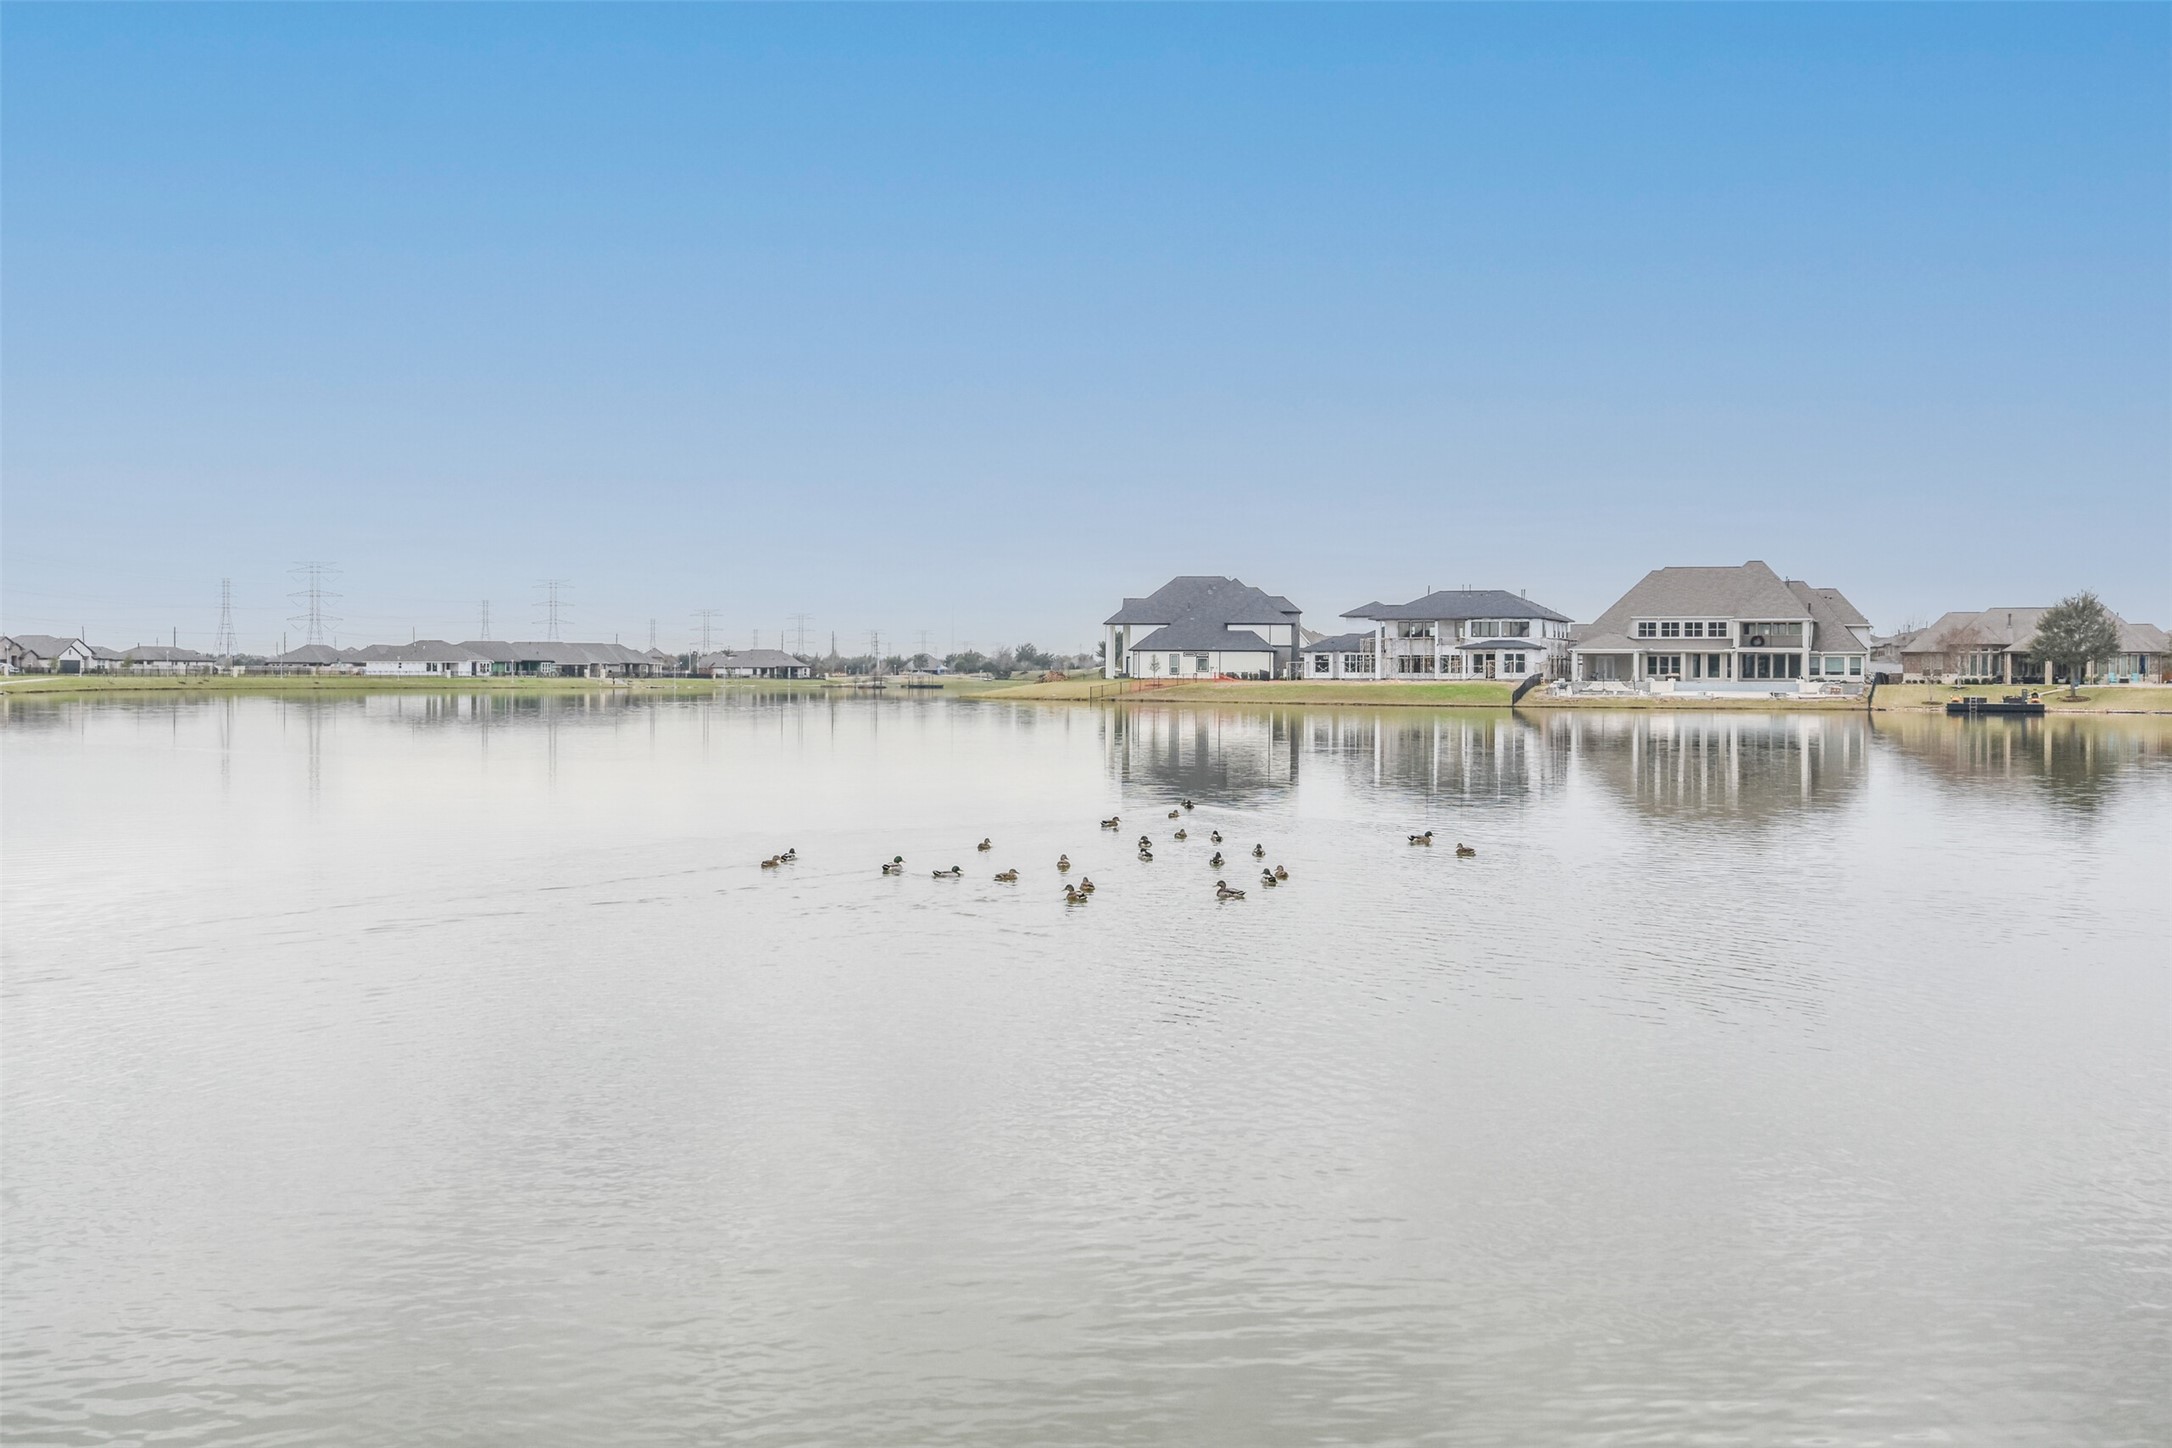 Location is unbeatable in this walkable community with lake access and private gated entrance.